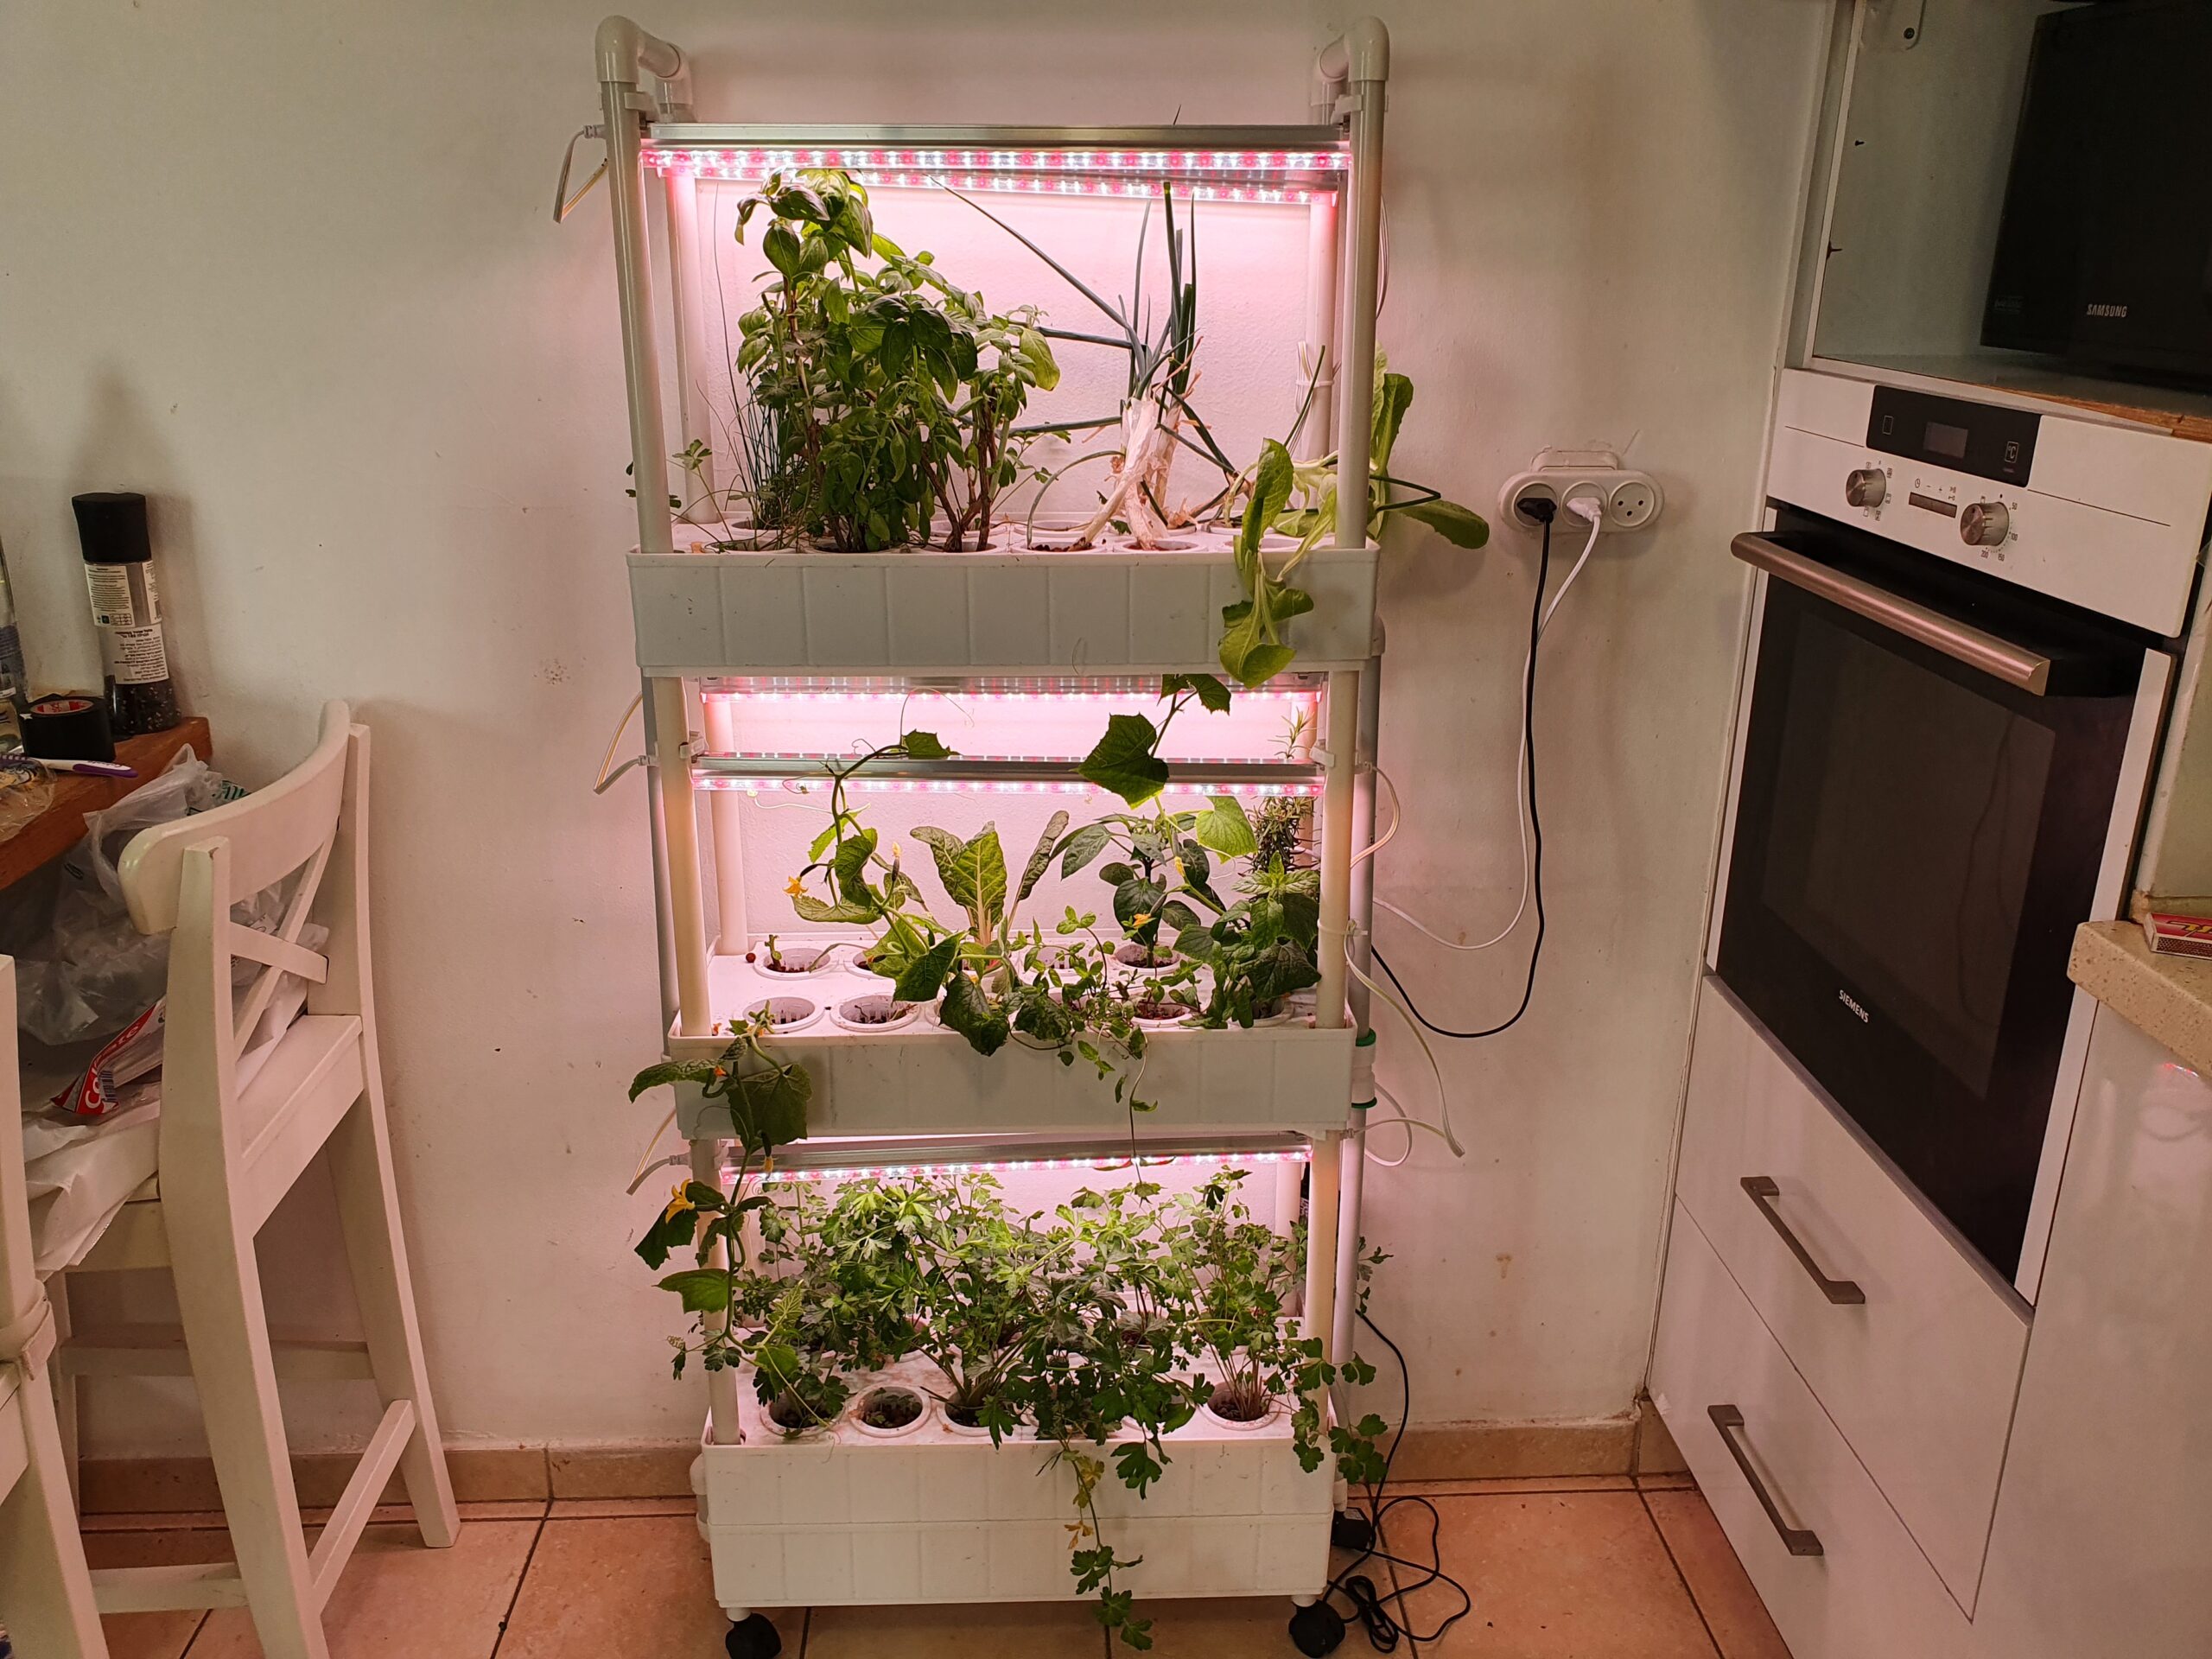 The hydroponic system in my kitchen